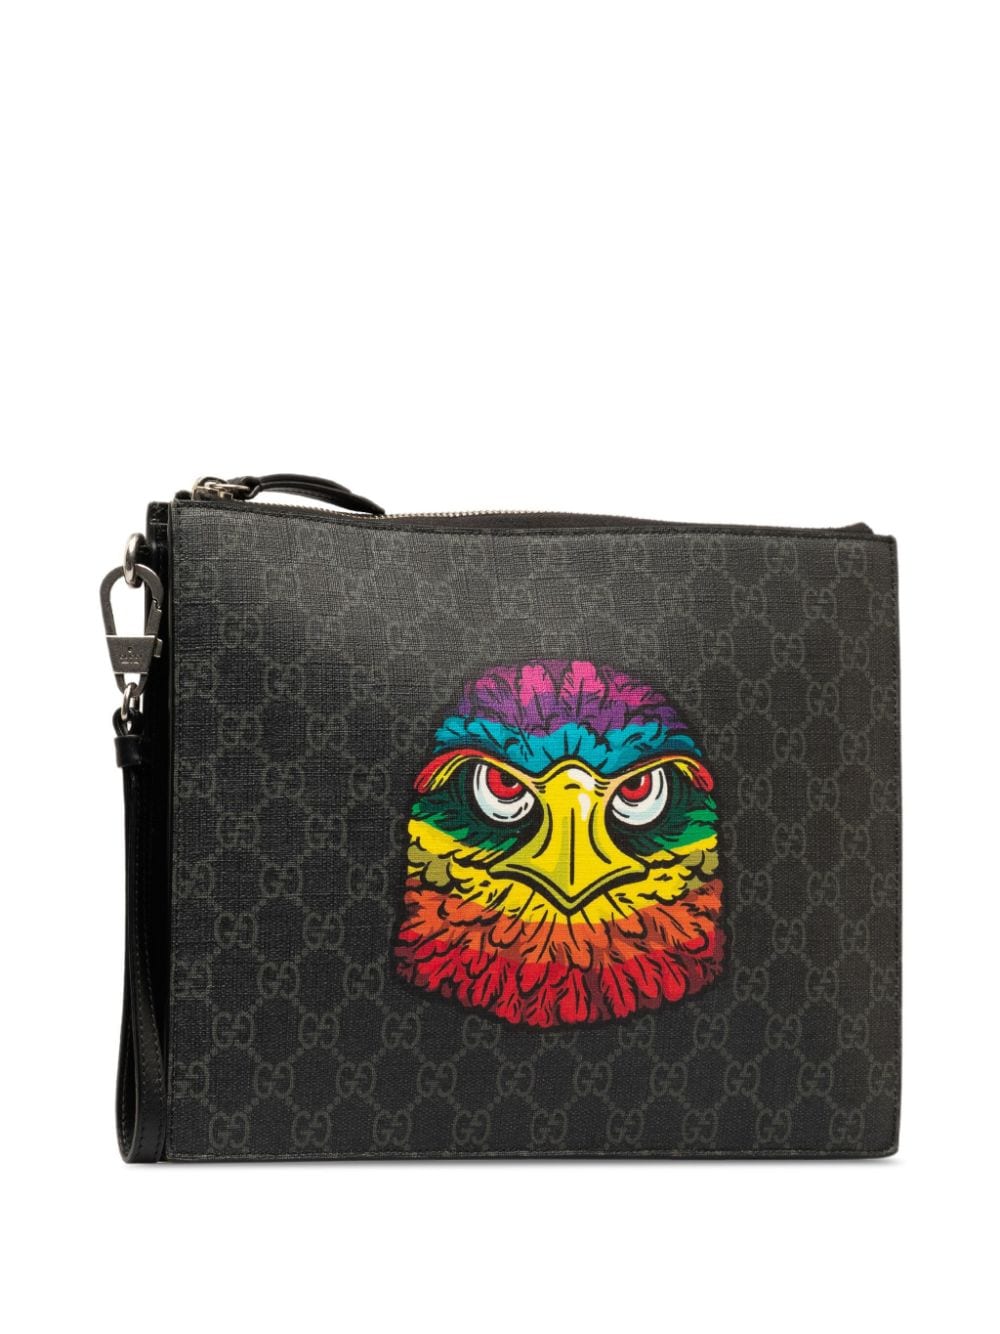 Pre-owned Gucci 2015-2022 Rainbow Eagle Clutch Bag In Black